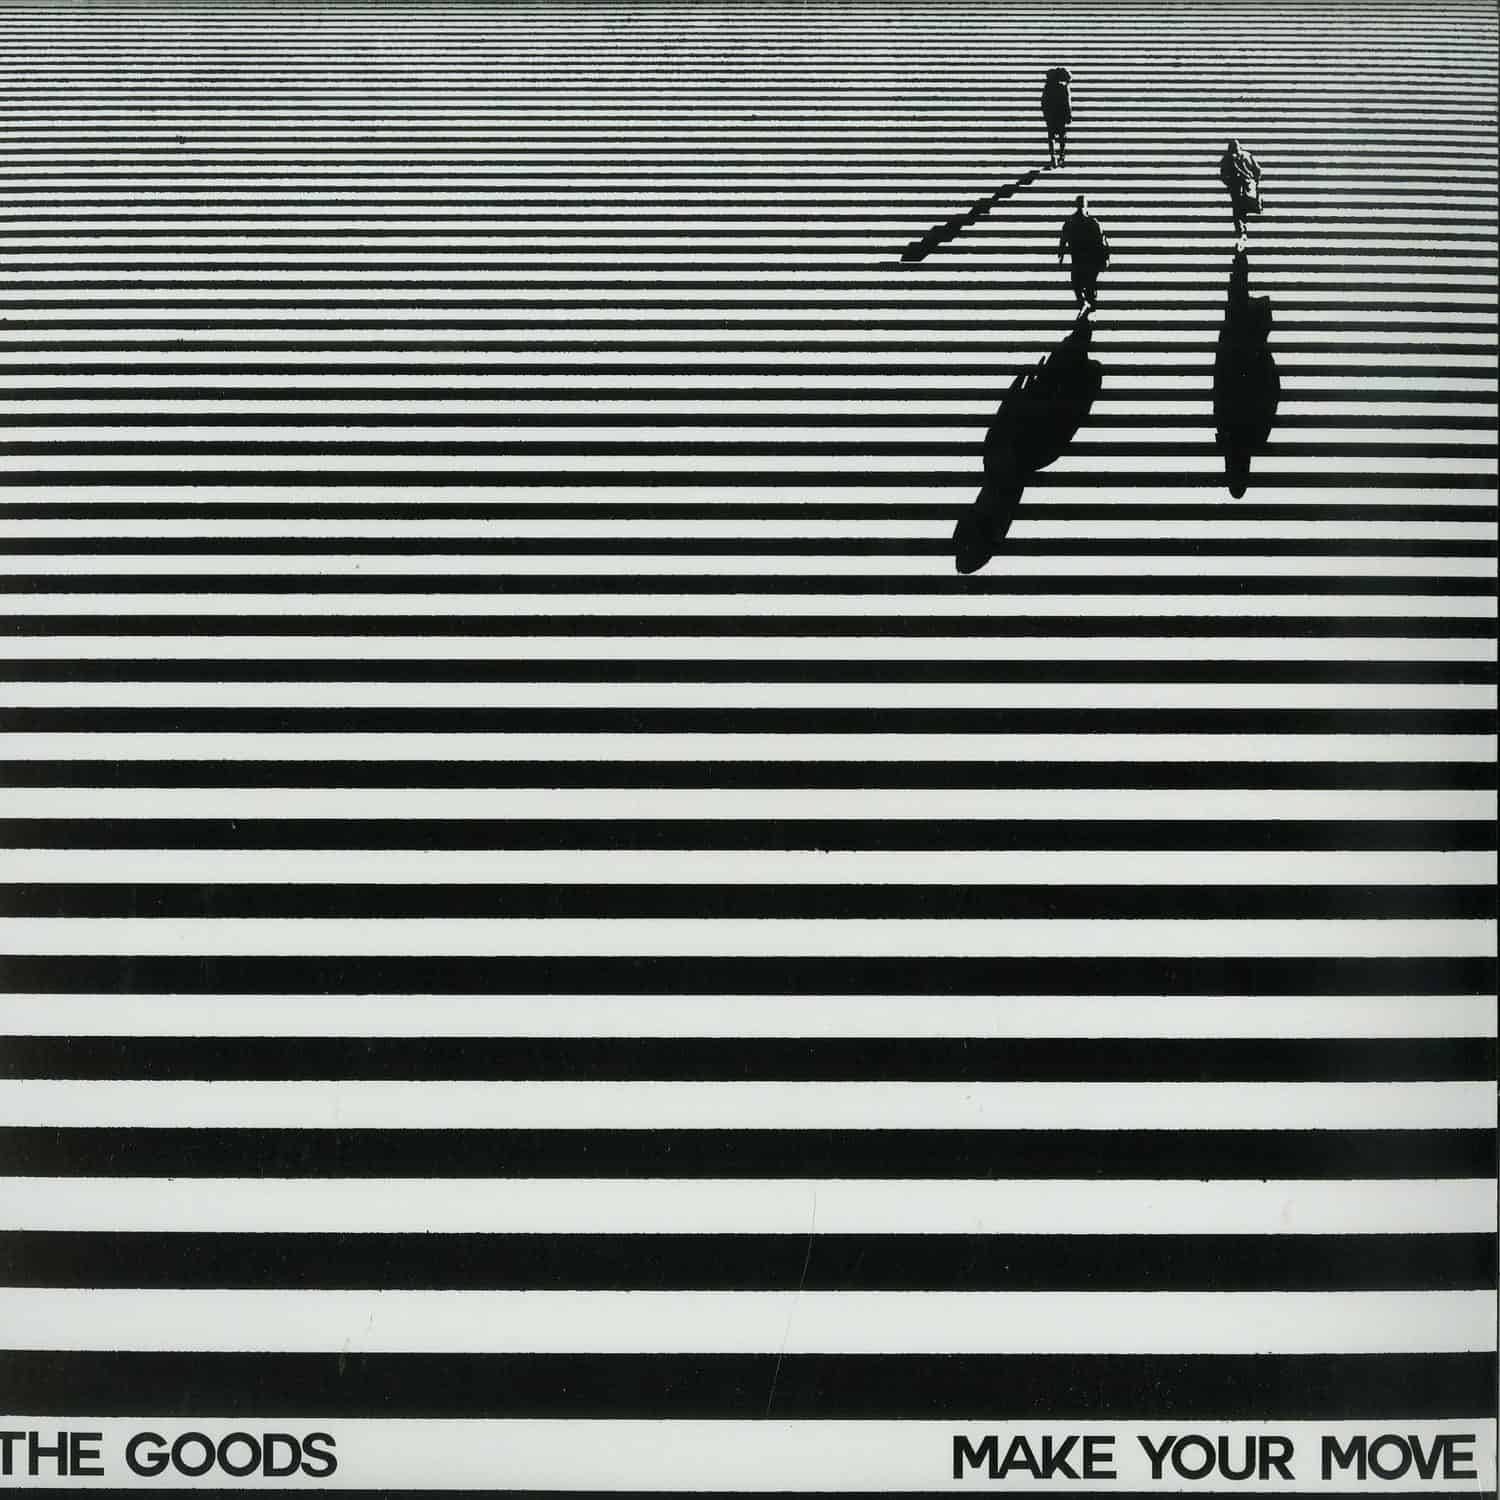 The Goods - MAKE YOUR MOVE